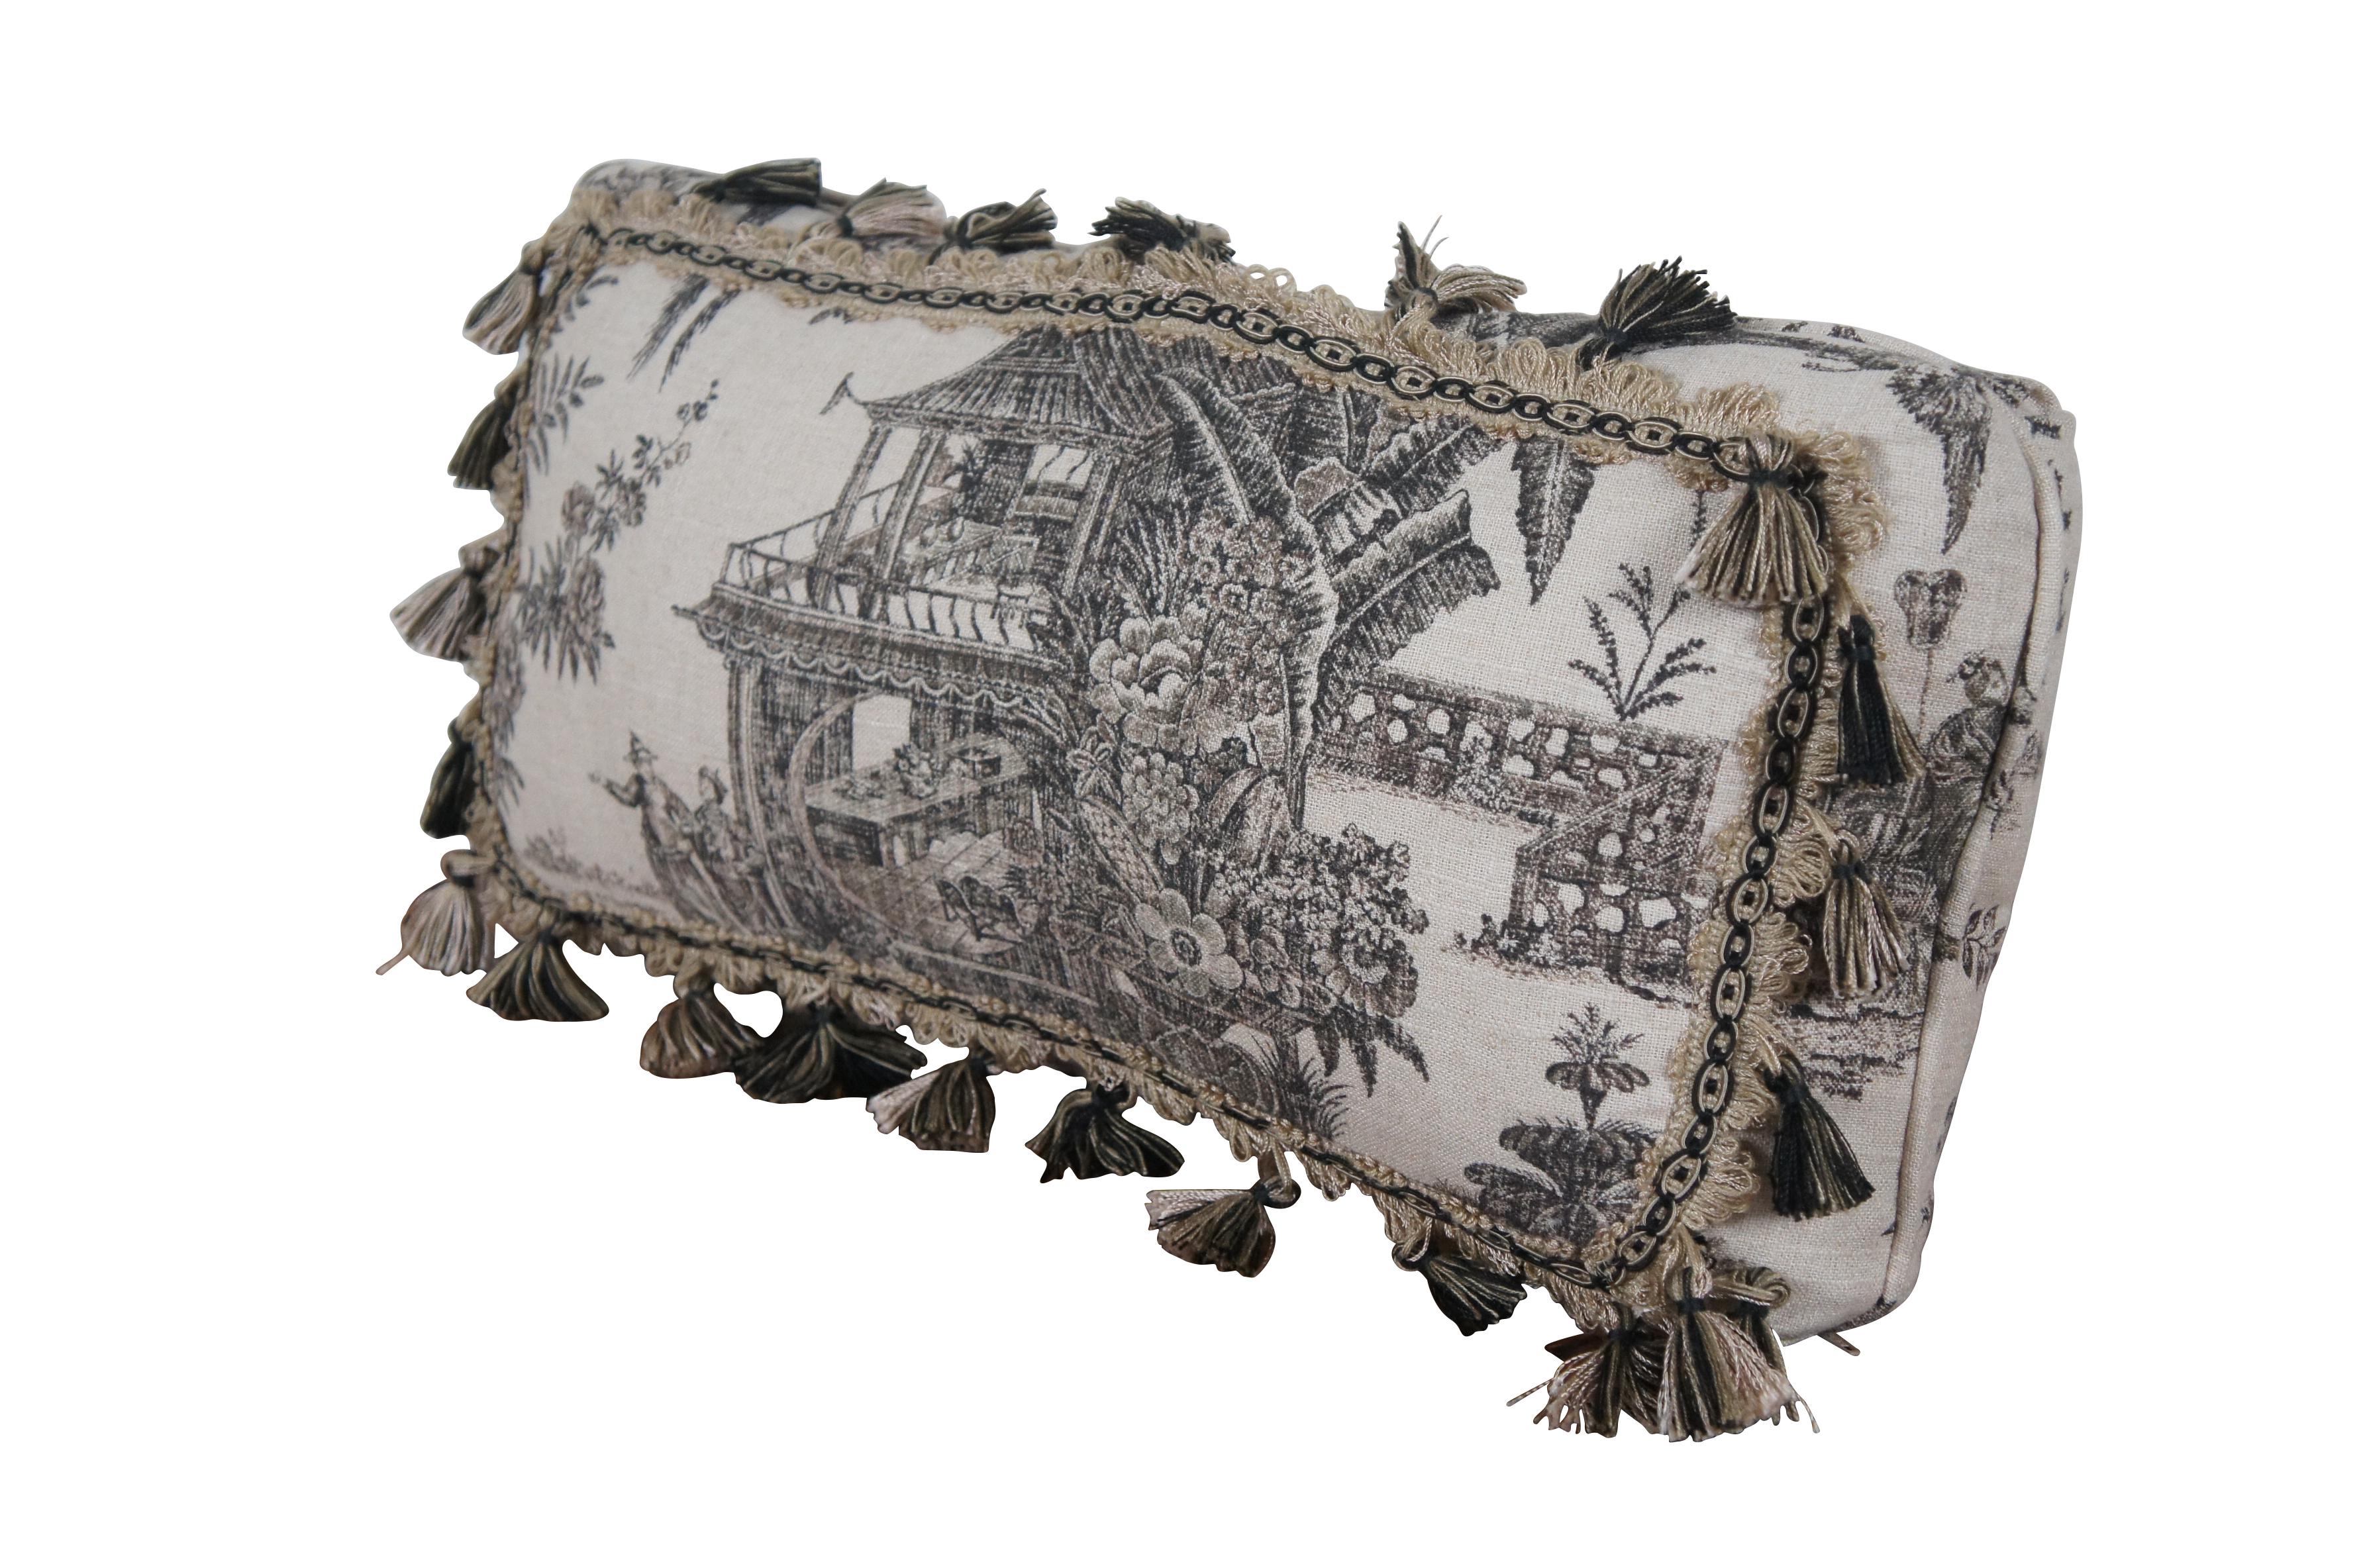 Late 20th century rectangular lumbar / throw pillow, featuring a black and white Chinoiserie toile style print on linen of a garden landscape with pagoda and geisha figures, bordered with cream and black braided trim and tassels. Zipper closure.